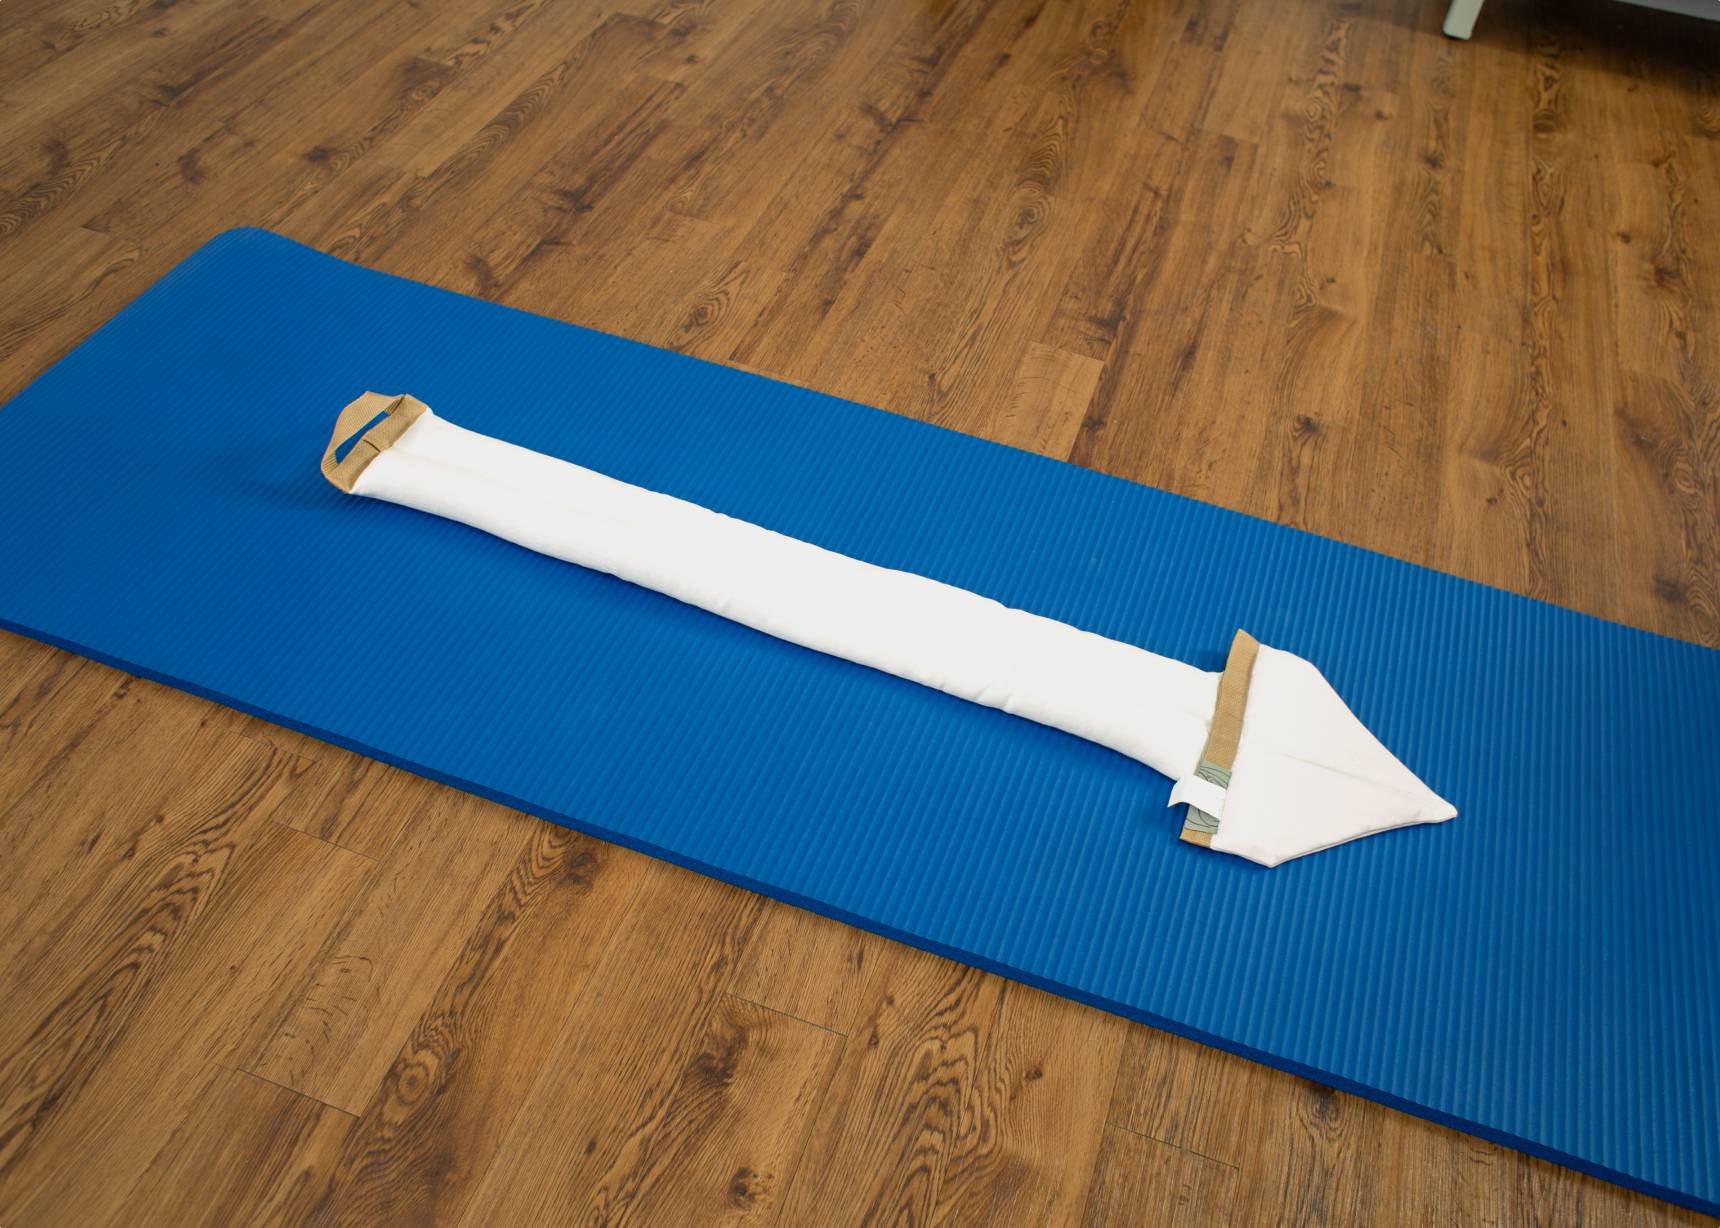 White SmartSpine cushion placed neatly on a blue exercise mat.